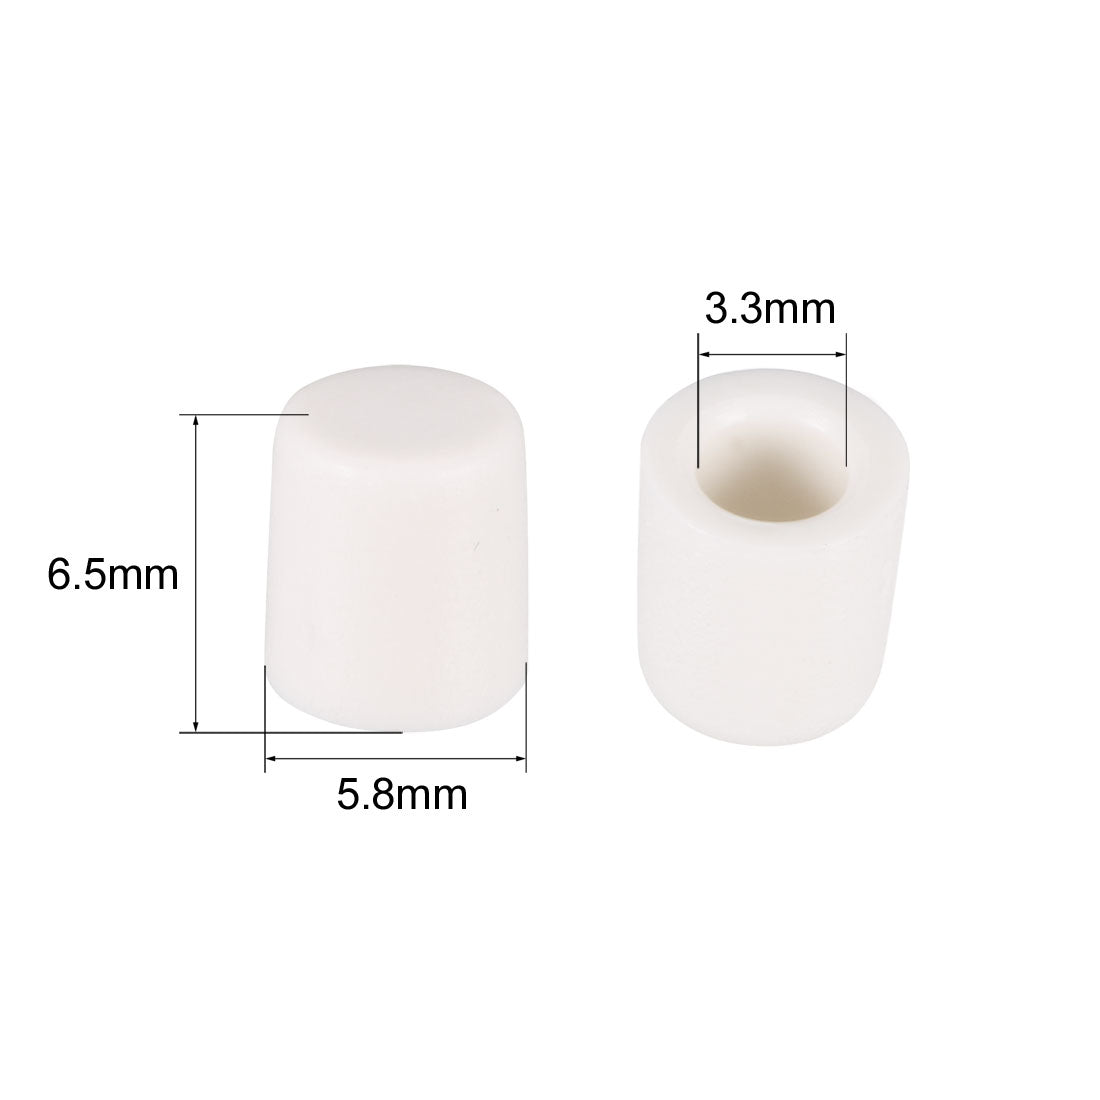 uxcell Uxcell 20Pcs 3.3mm Hole Dia Plastic Push Button Tactile Switch Caps Cover Keycaps Protector White for 6x6 Micro Switch